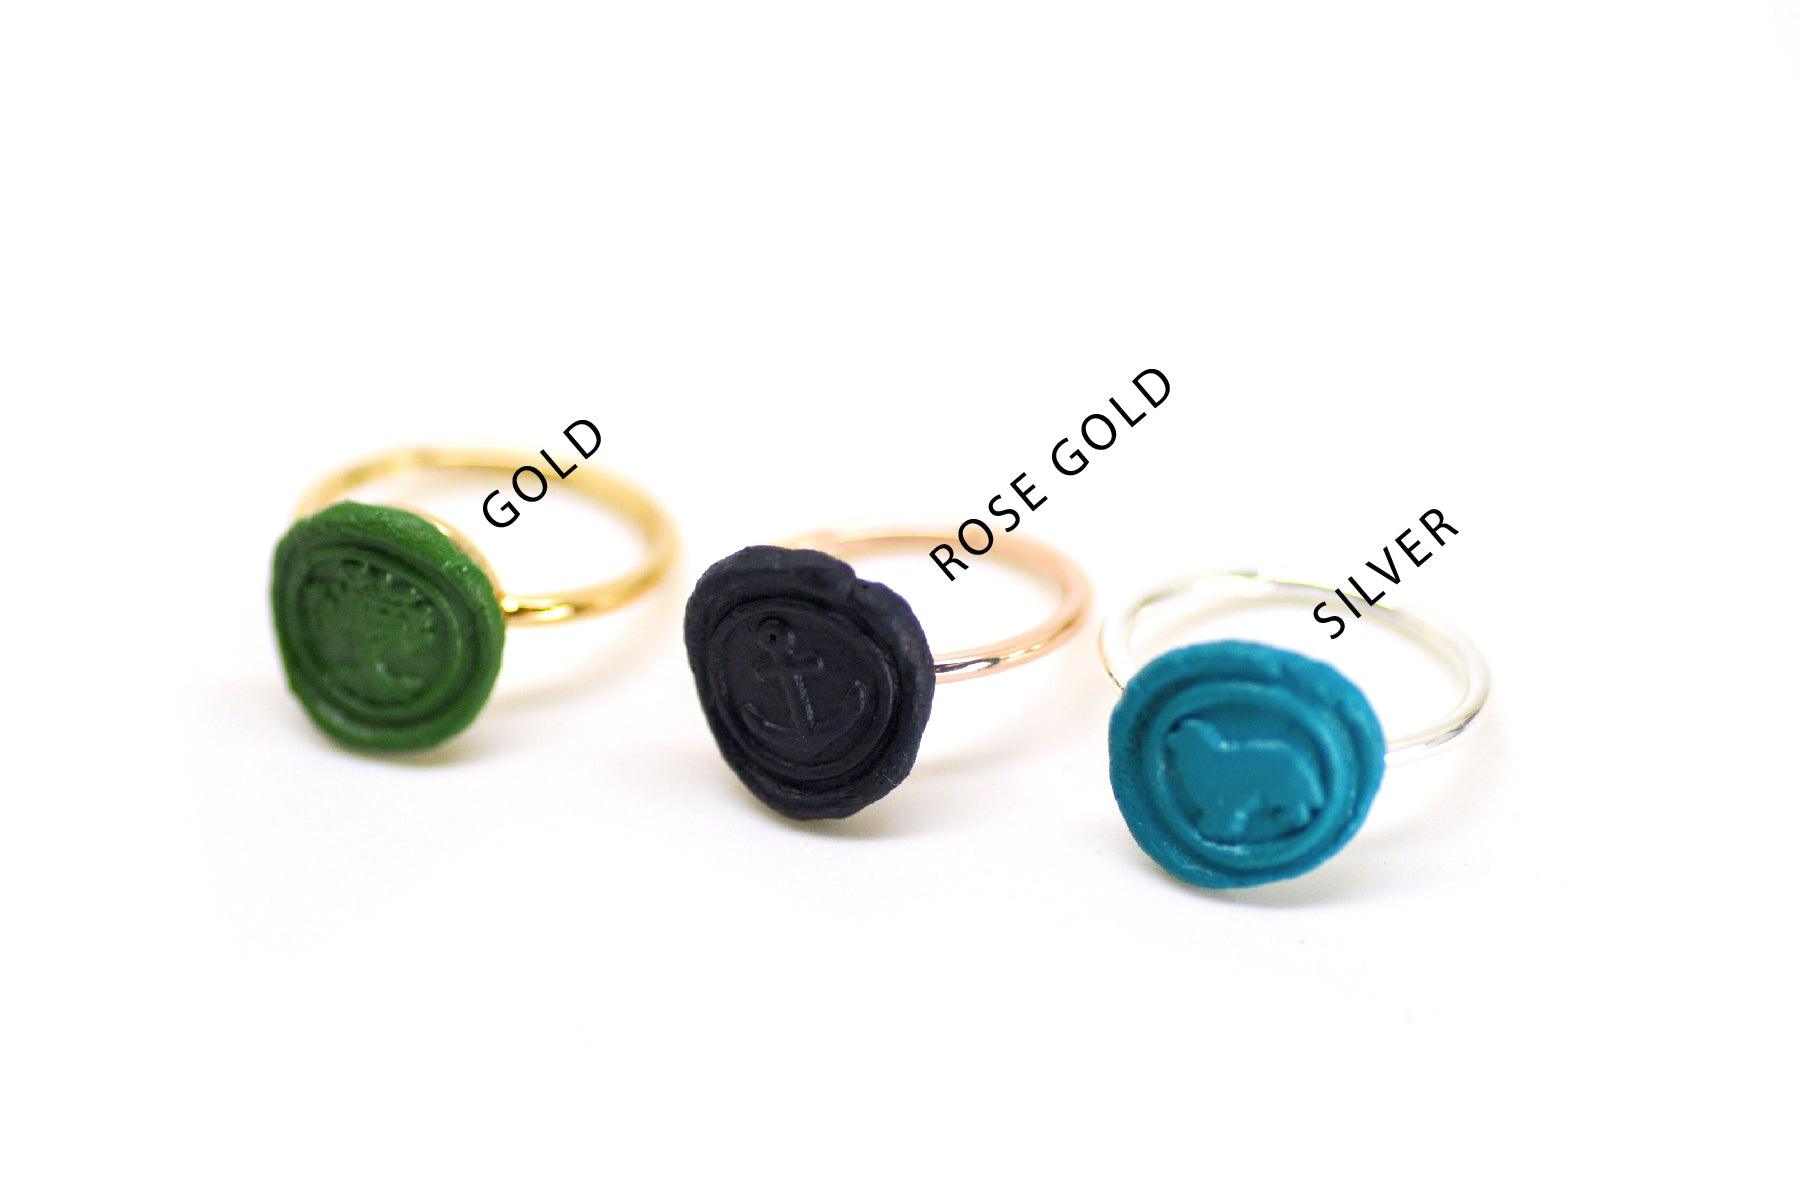 OOAK Laurel Wreath Initial Wax Seal Ring - Backtozero B20 - 1 initial, 1initial, Handmade, Initial, Laurel Wreath, Letter, Navy, Navy Blue, One Initial, OOAK, Personalized, ring, size 7, wreath